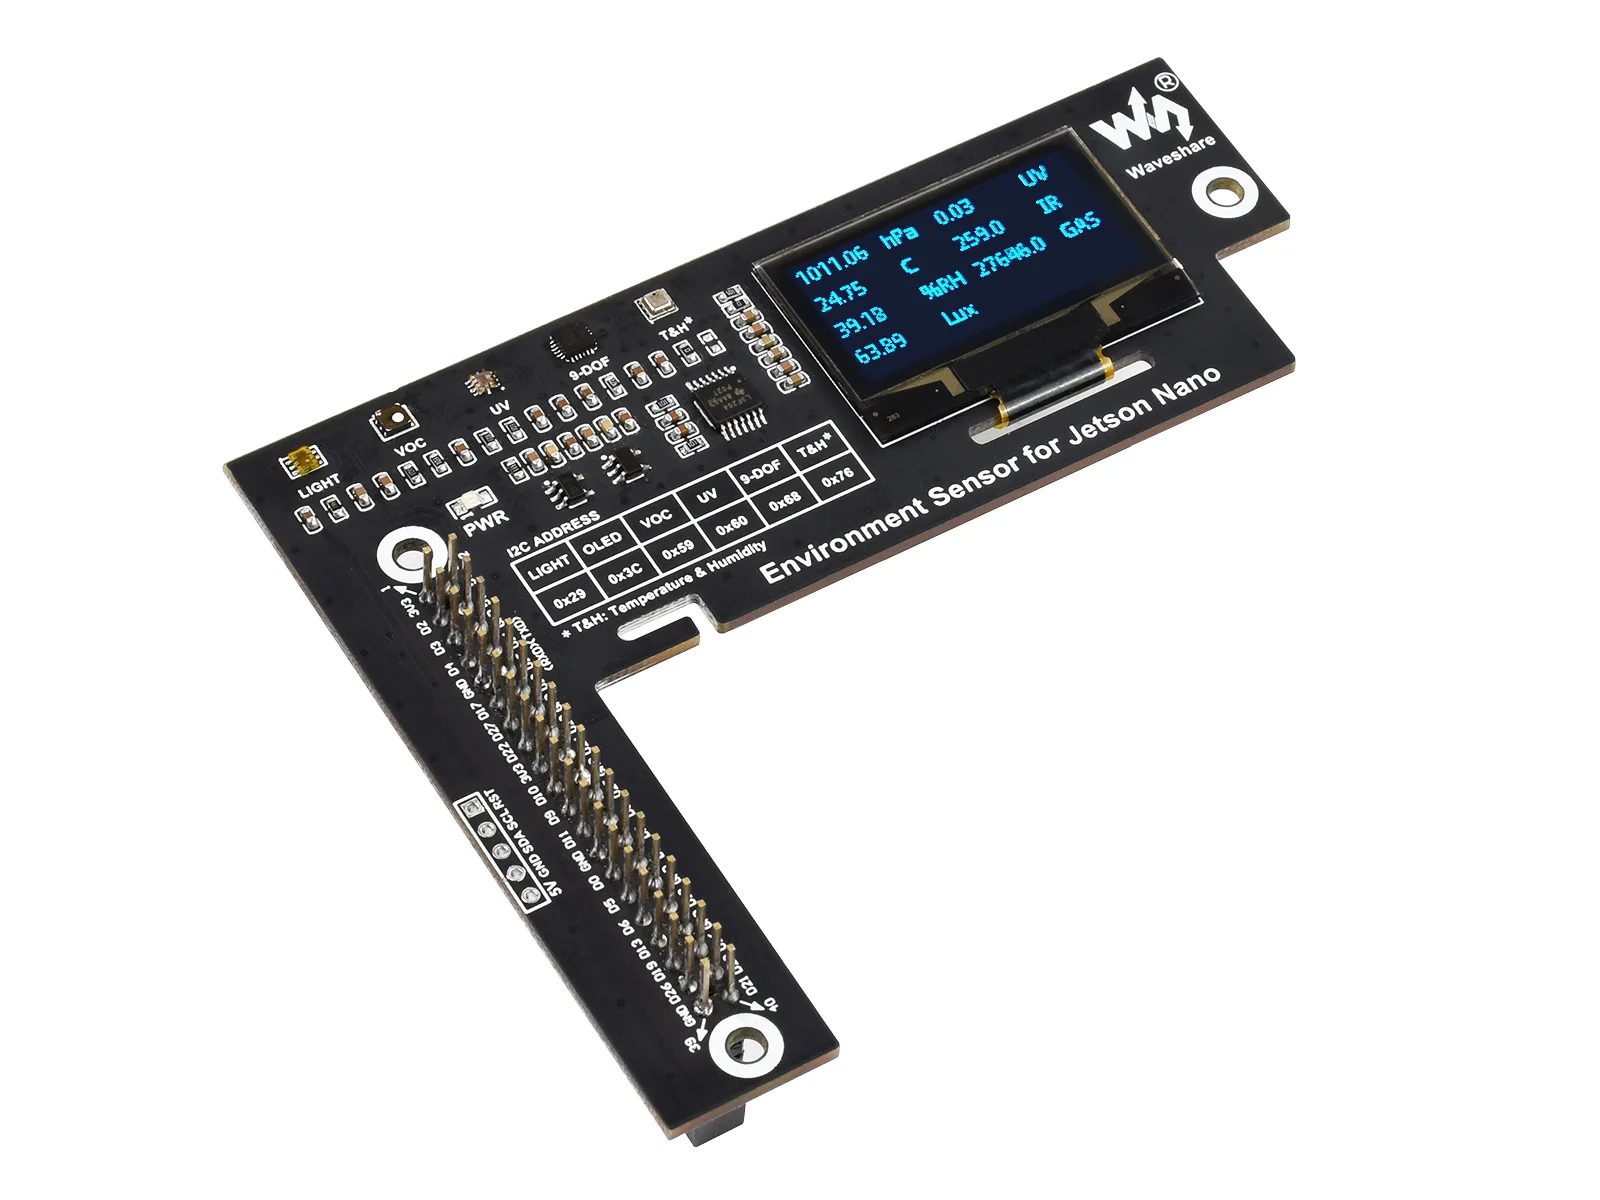 

Waveshare Environment Sensor Module Designed For Jetson Nano, I2C Bus, With 1.3inch OLED Display